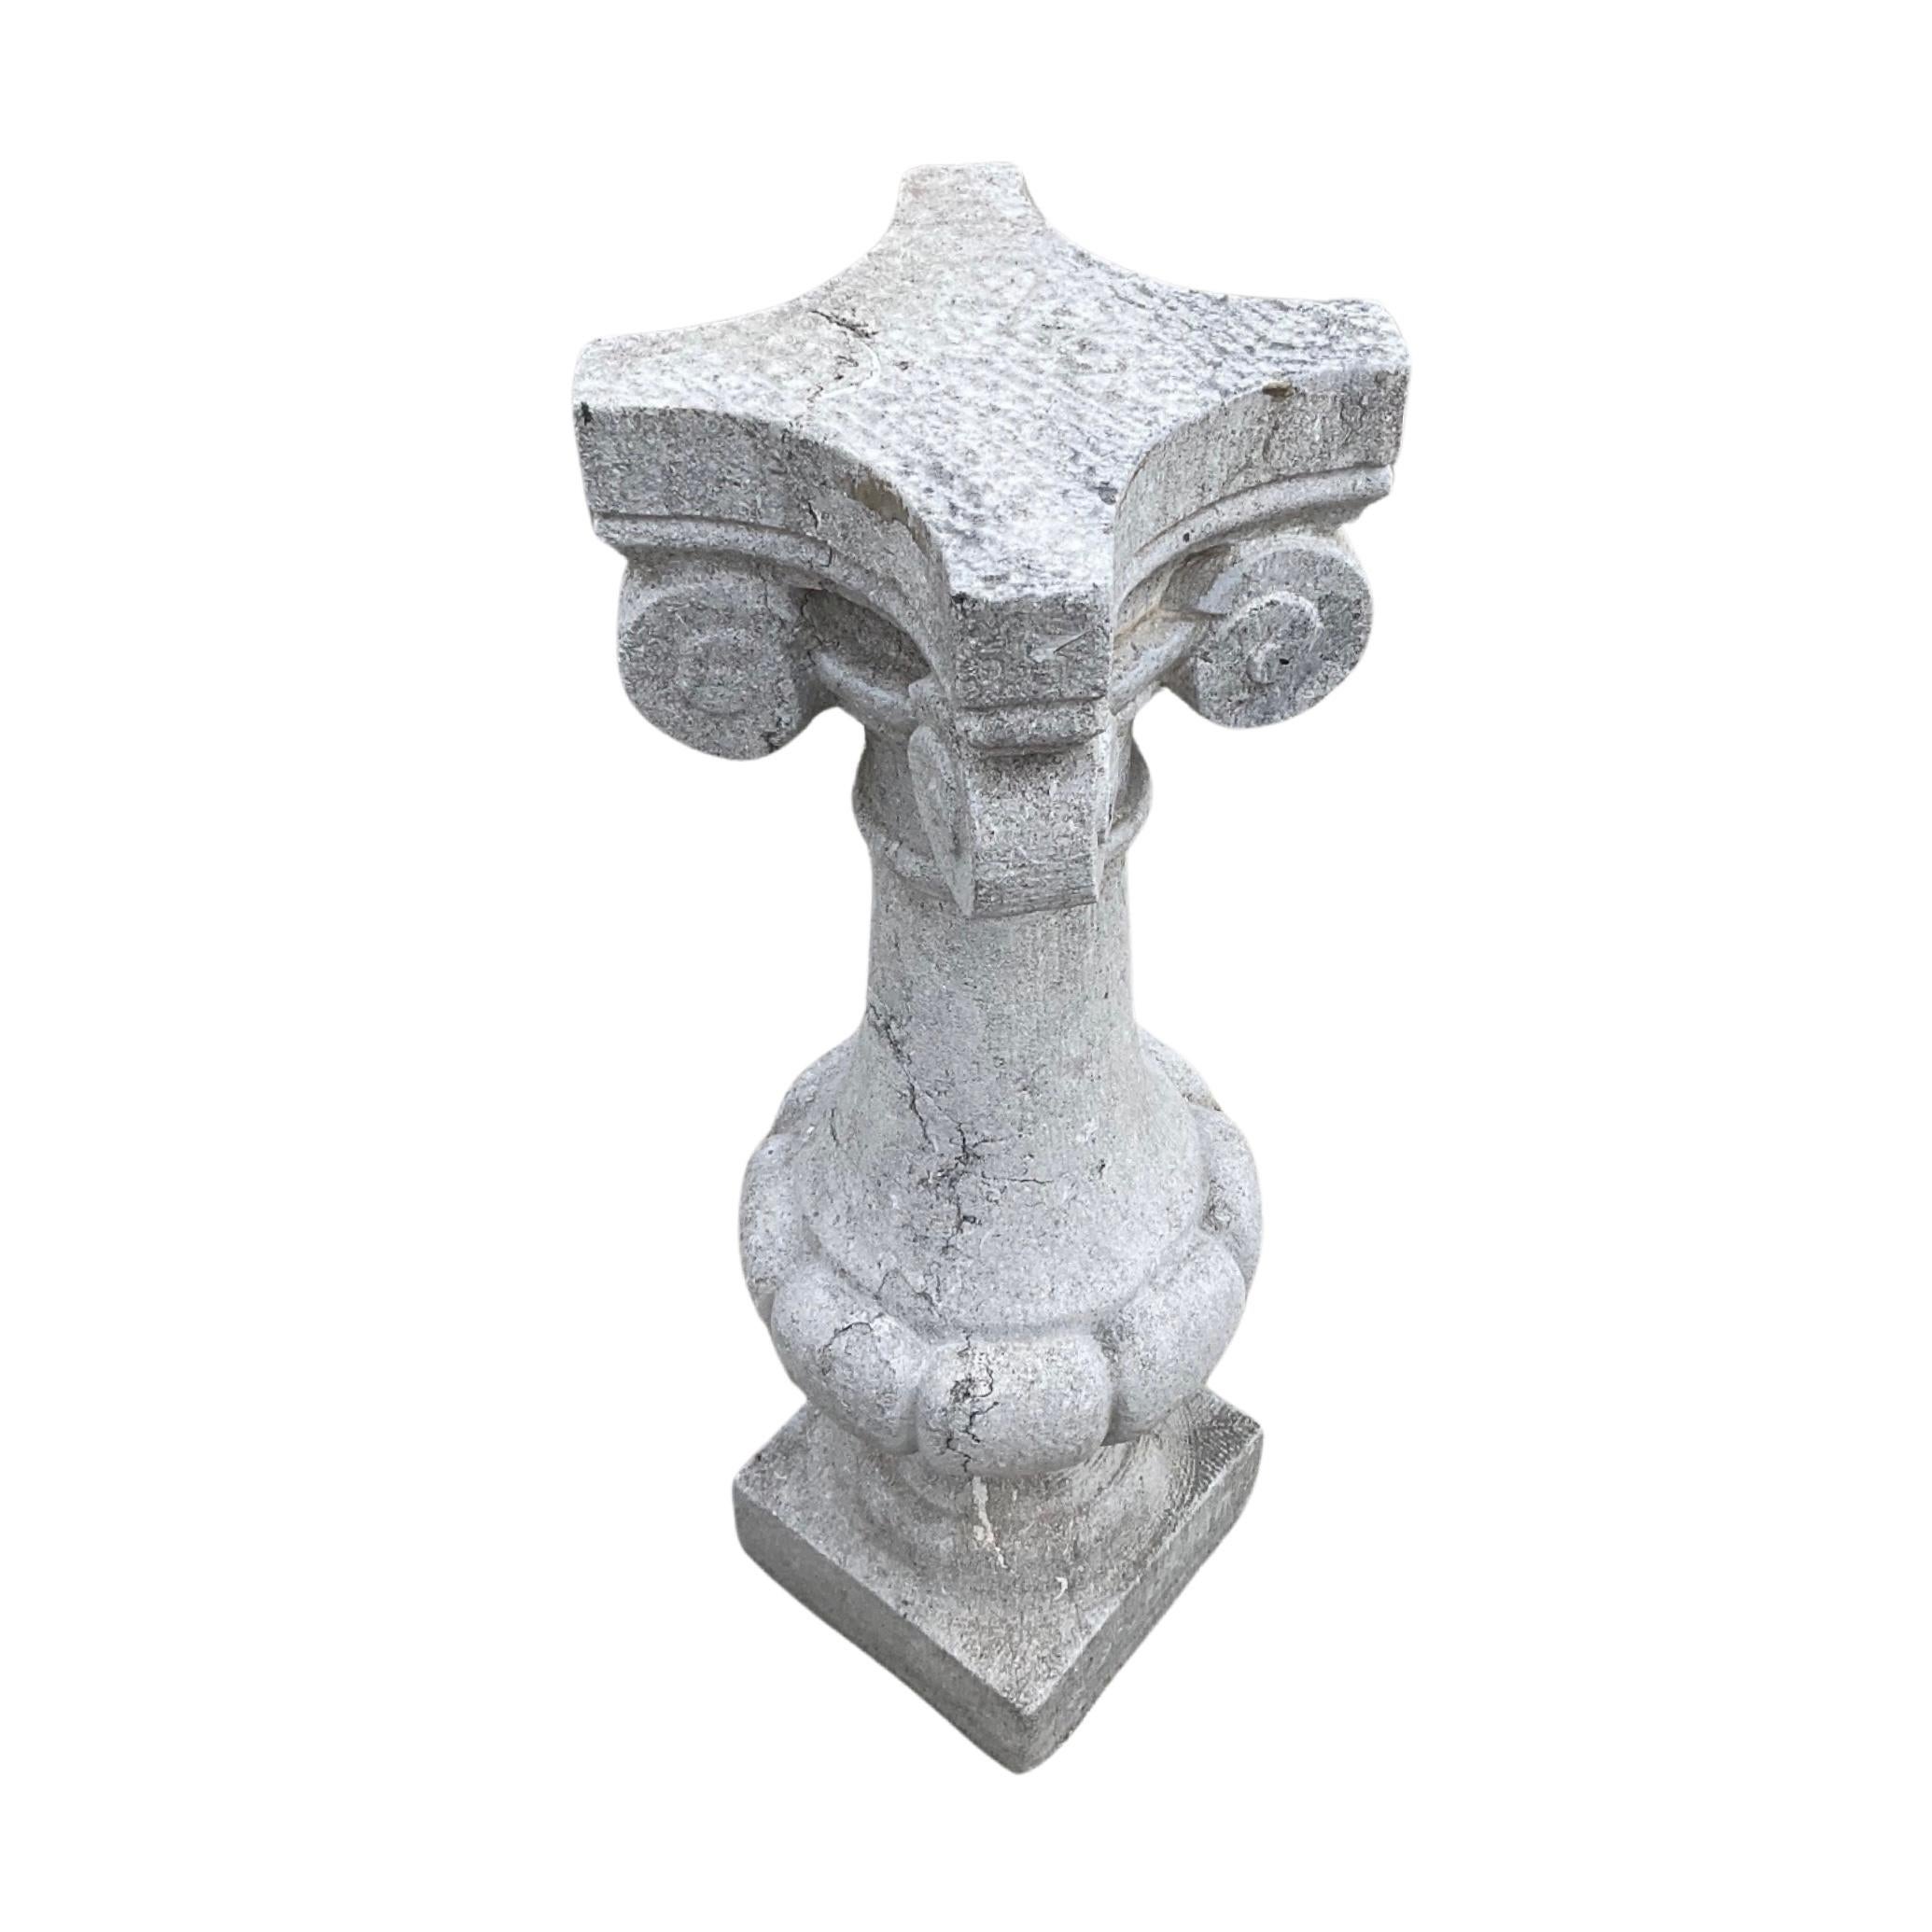 These authentic 18th-century Belgian Bluestone Balusters provide a unique and antique look. Perfect for creating a base for a tabletop or for decorating a garden, this timeless design will add a touch of classic elegance to your home.
